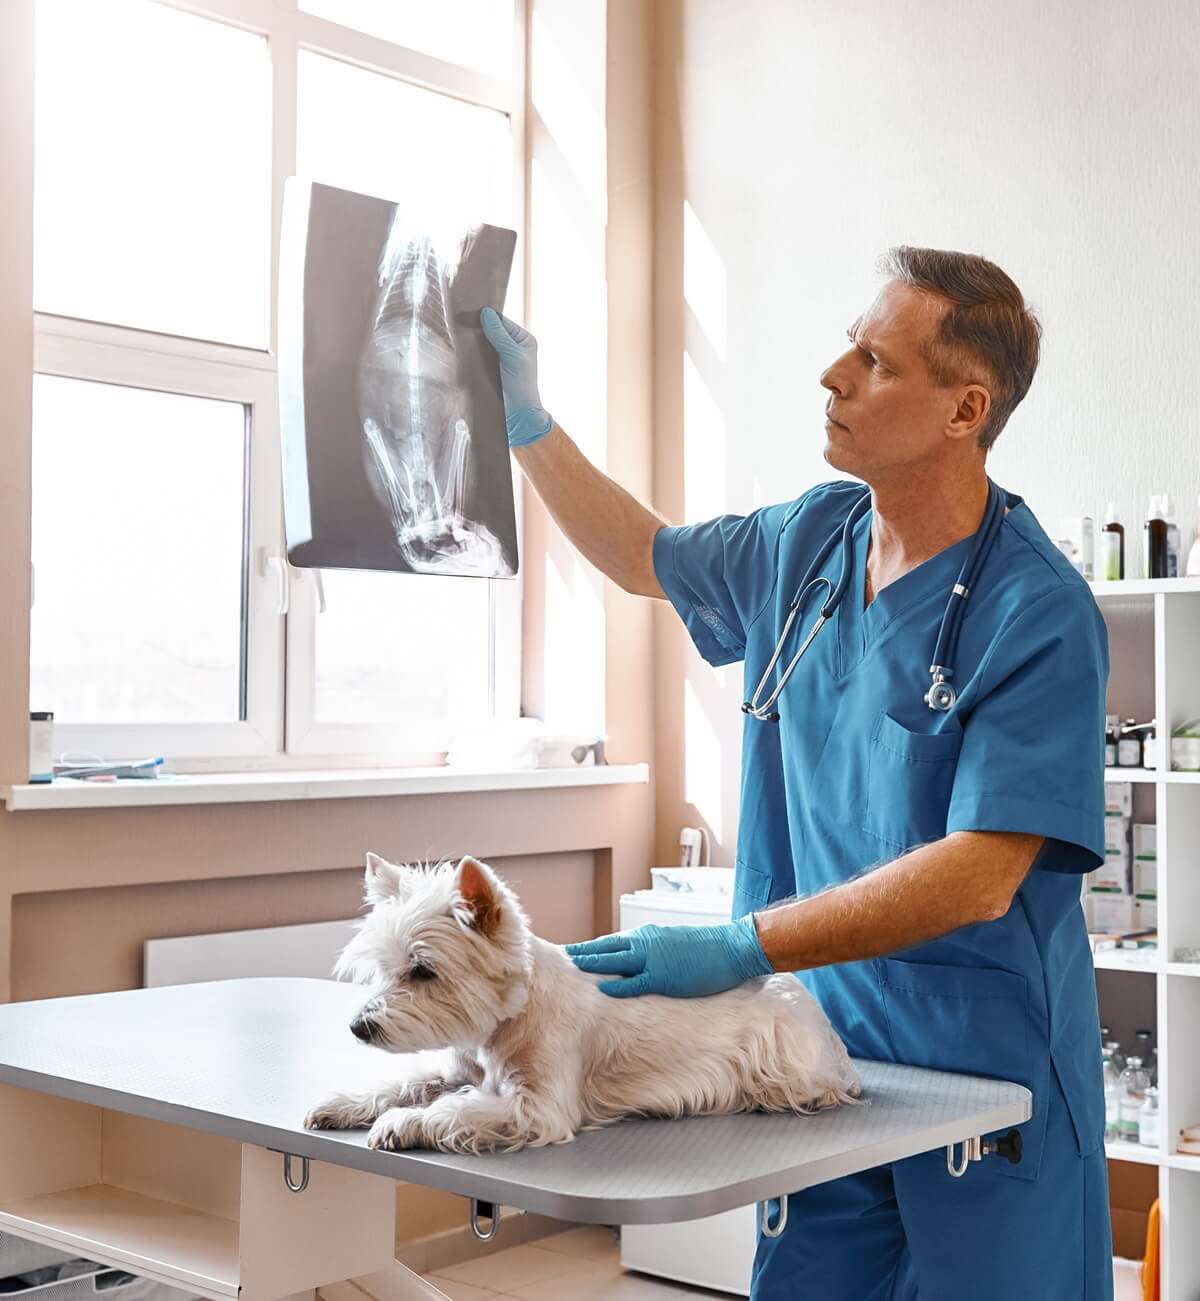 Vet looking at dog x-ray while dog sits in front of him on exam table